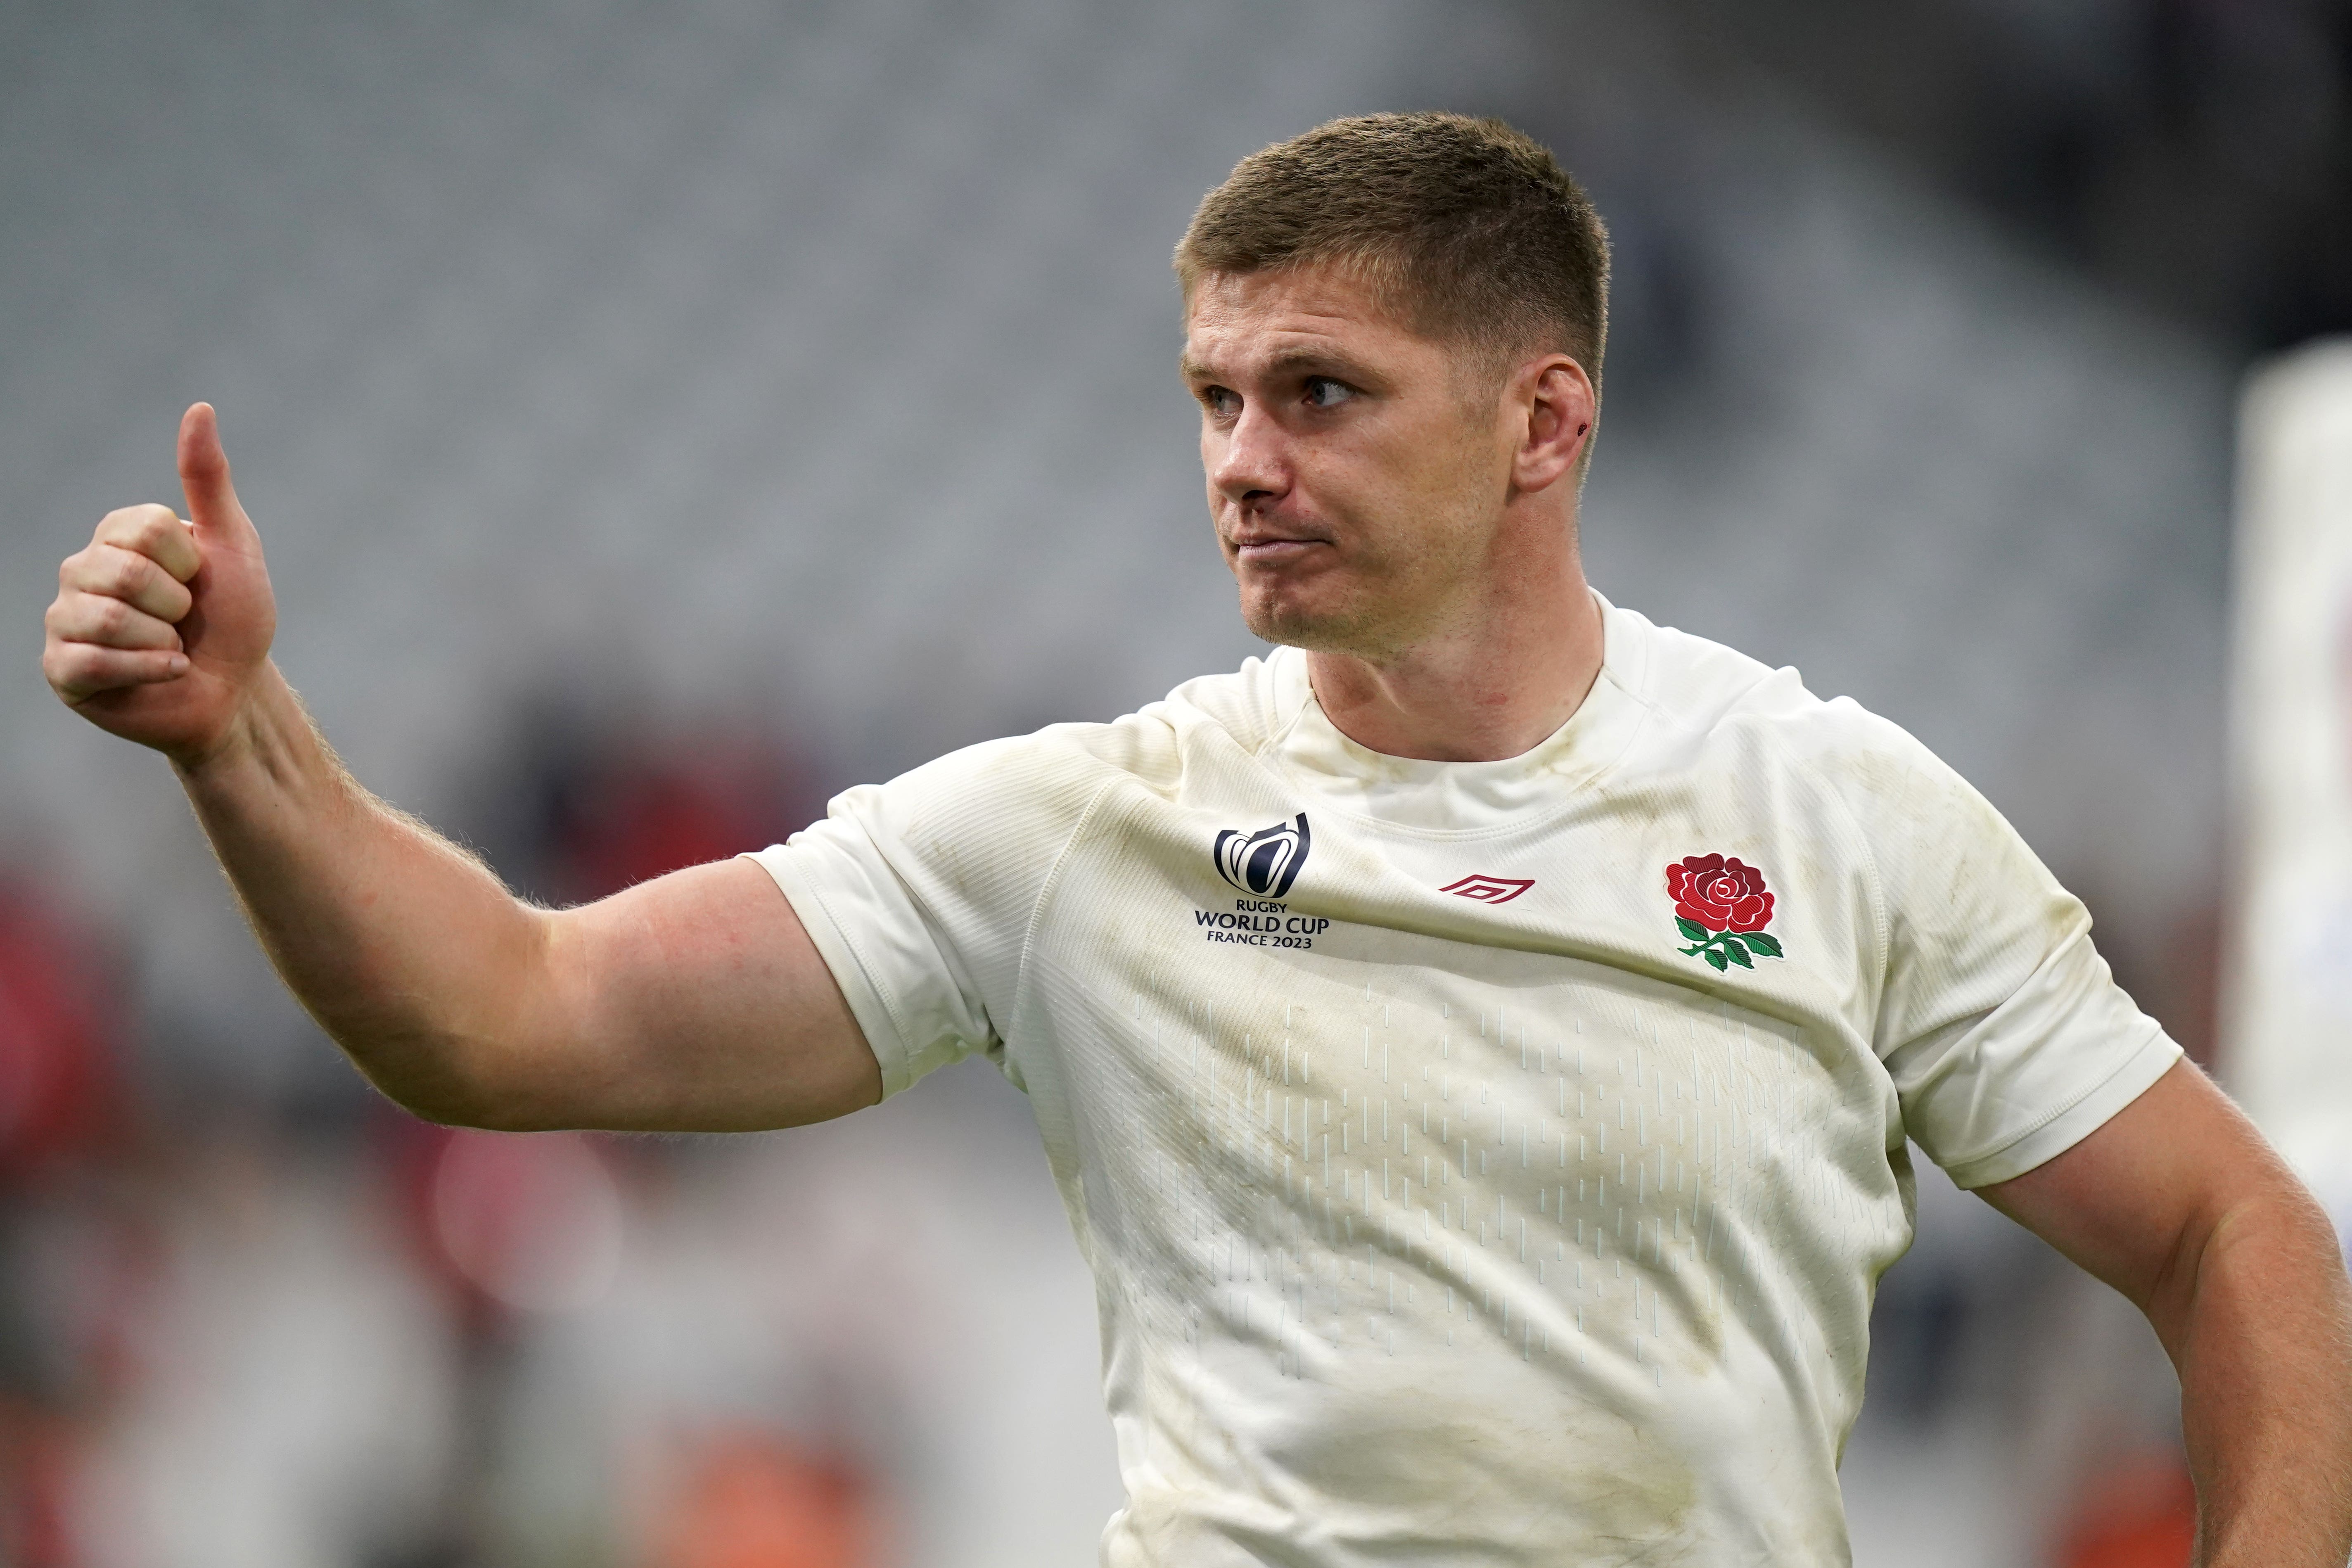 Owen Farrell has been linked with a move to the French Top 14